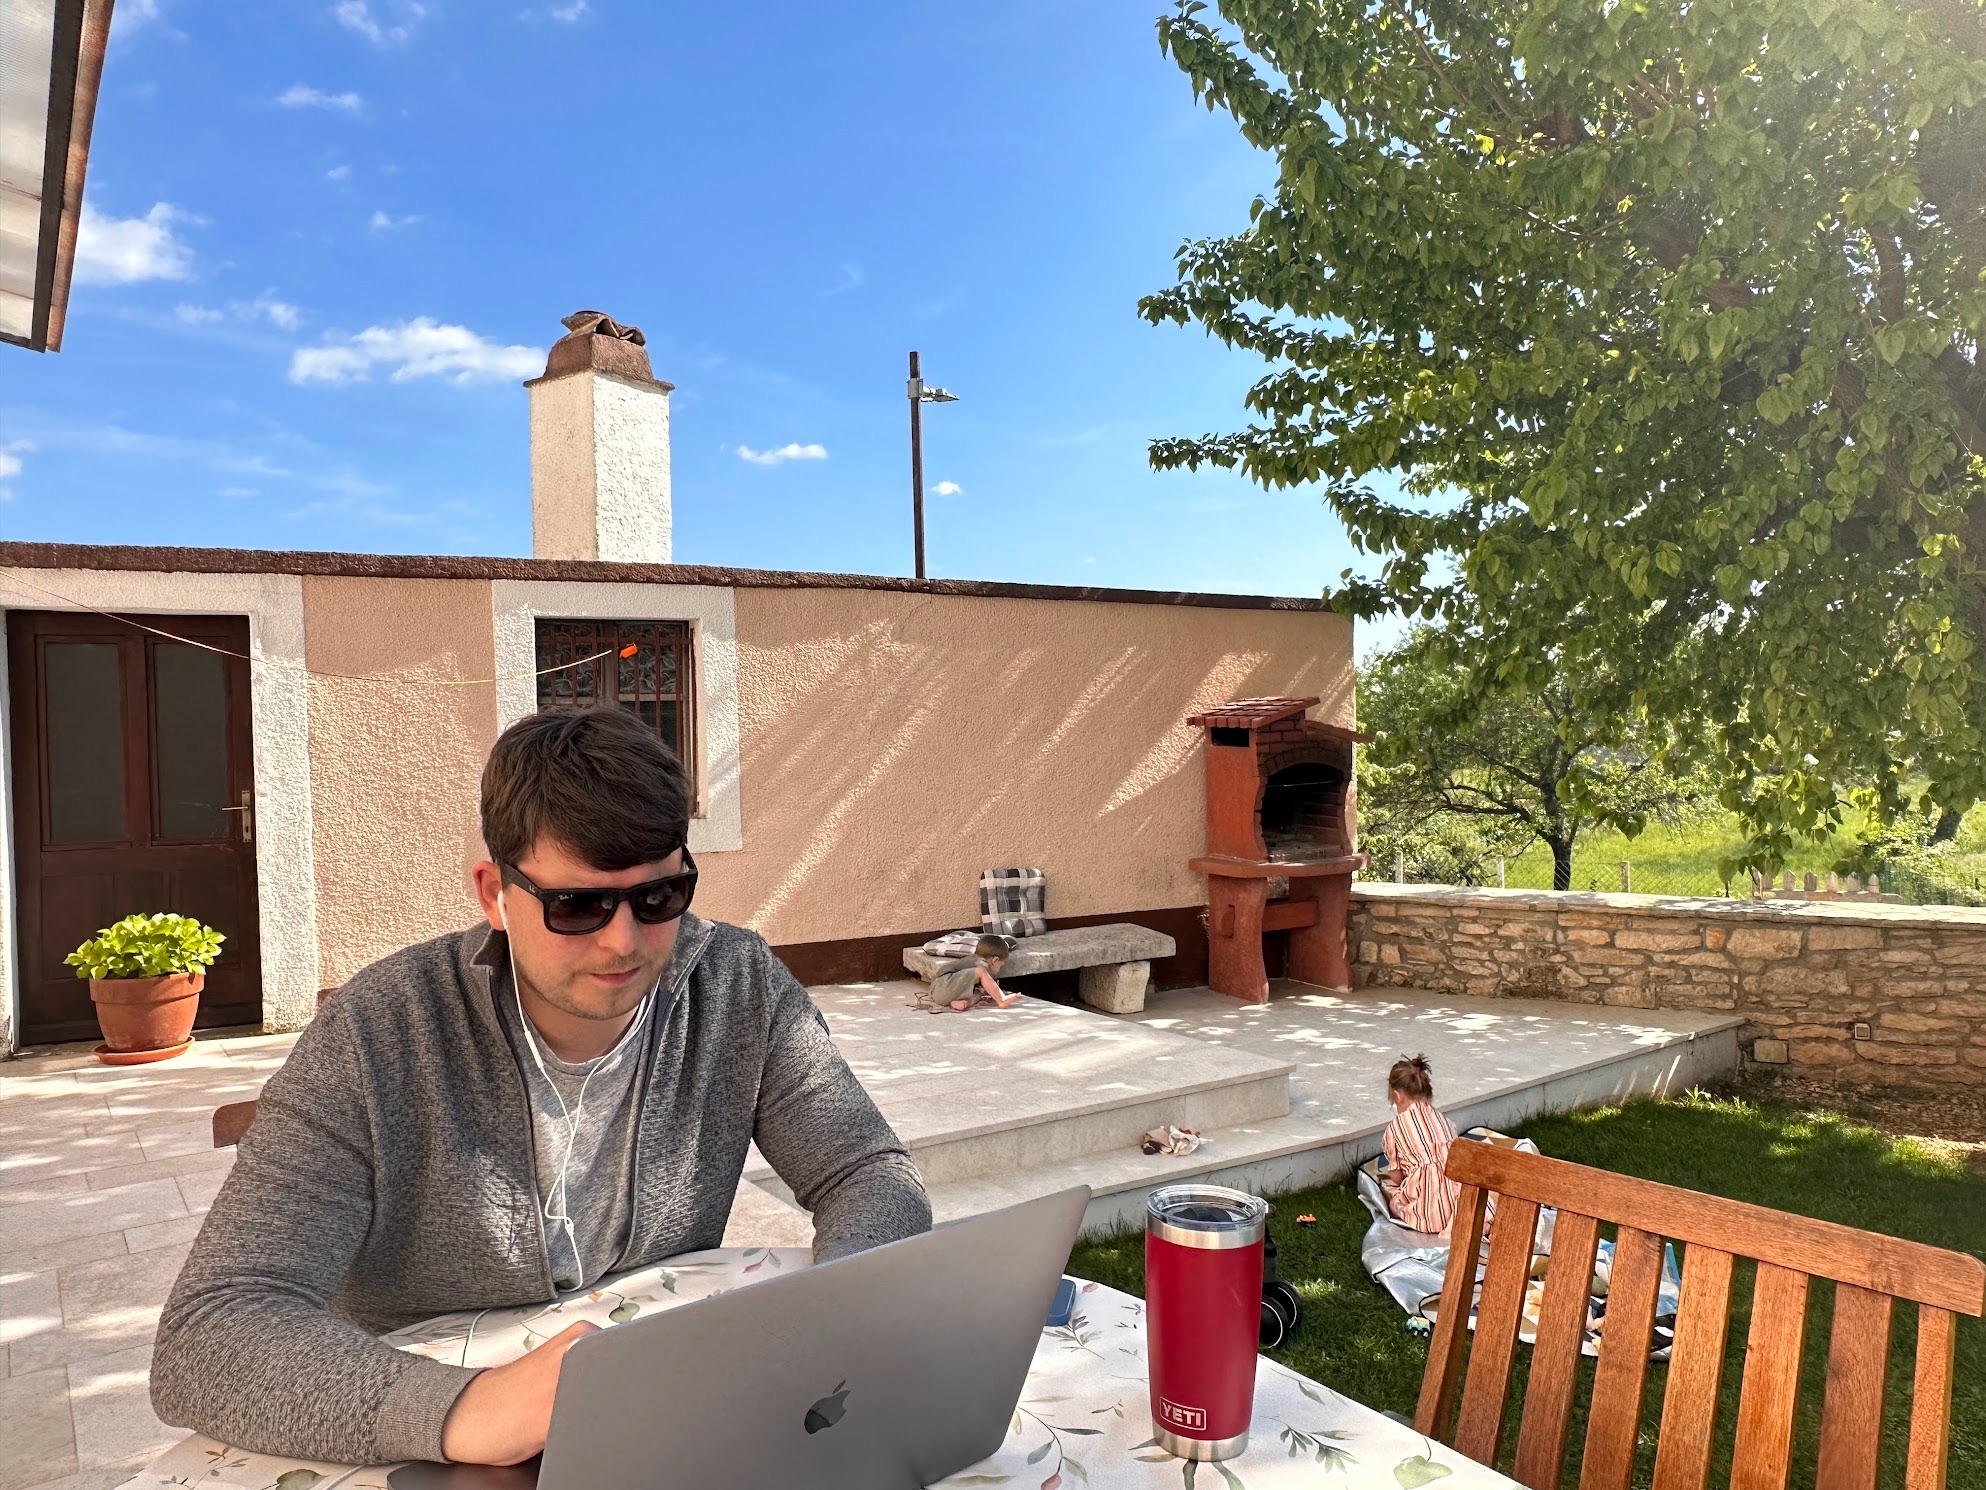 Me working outside on a sunny day in Croatia in early May while the kids are playing in the background.